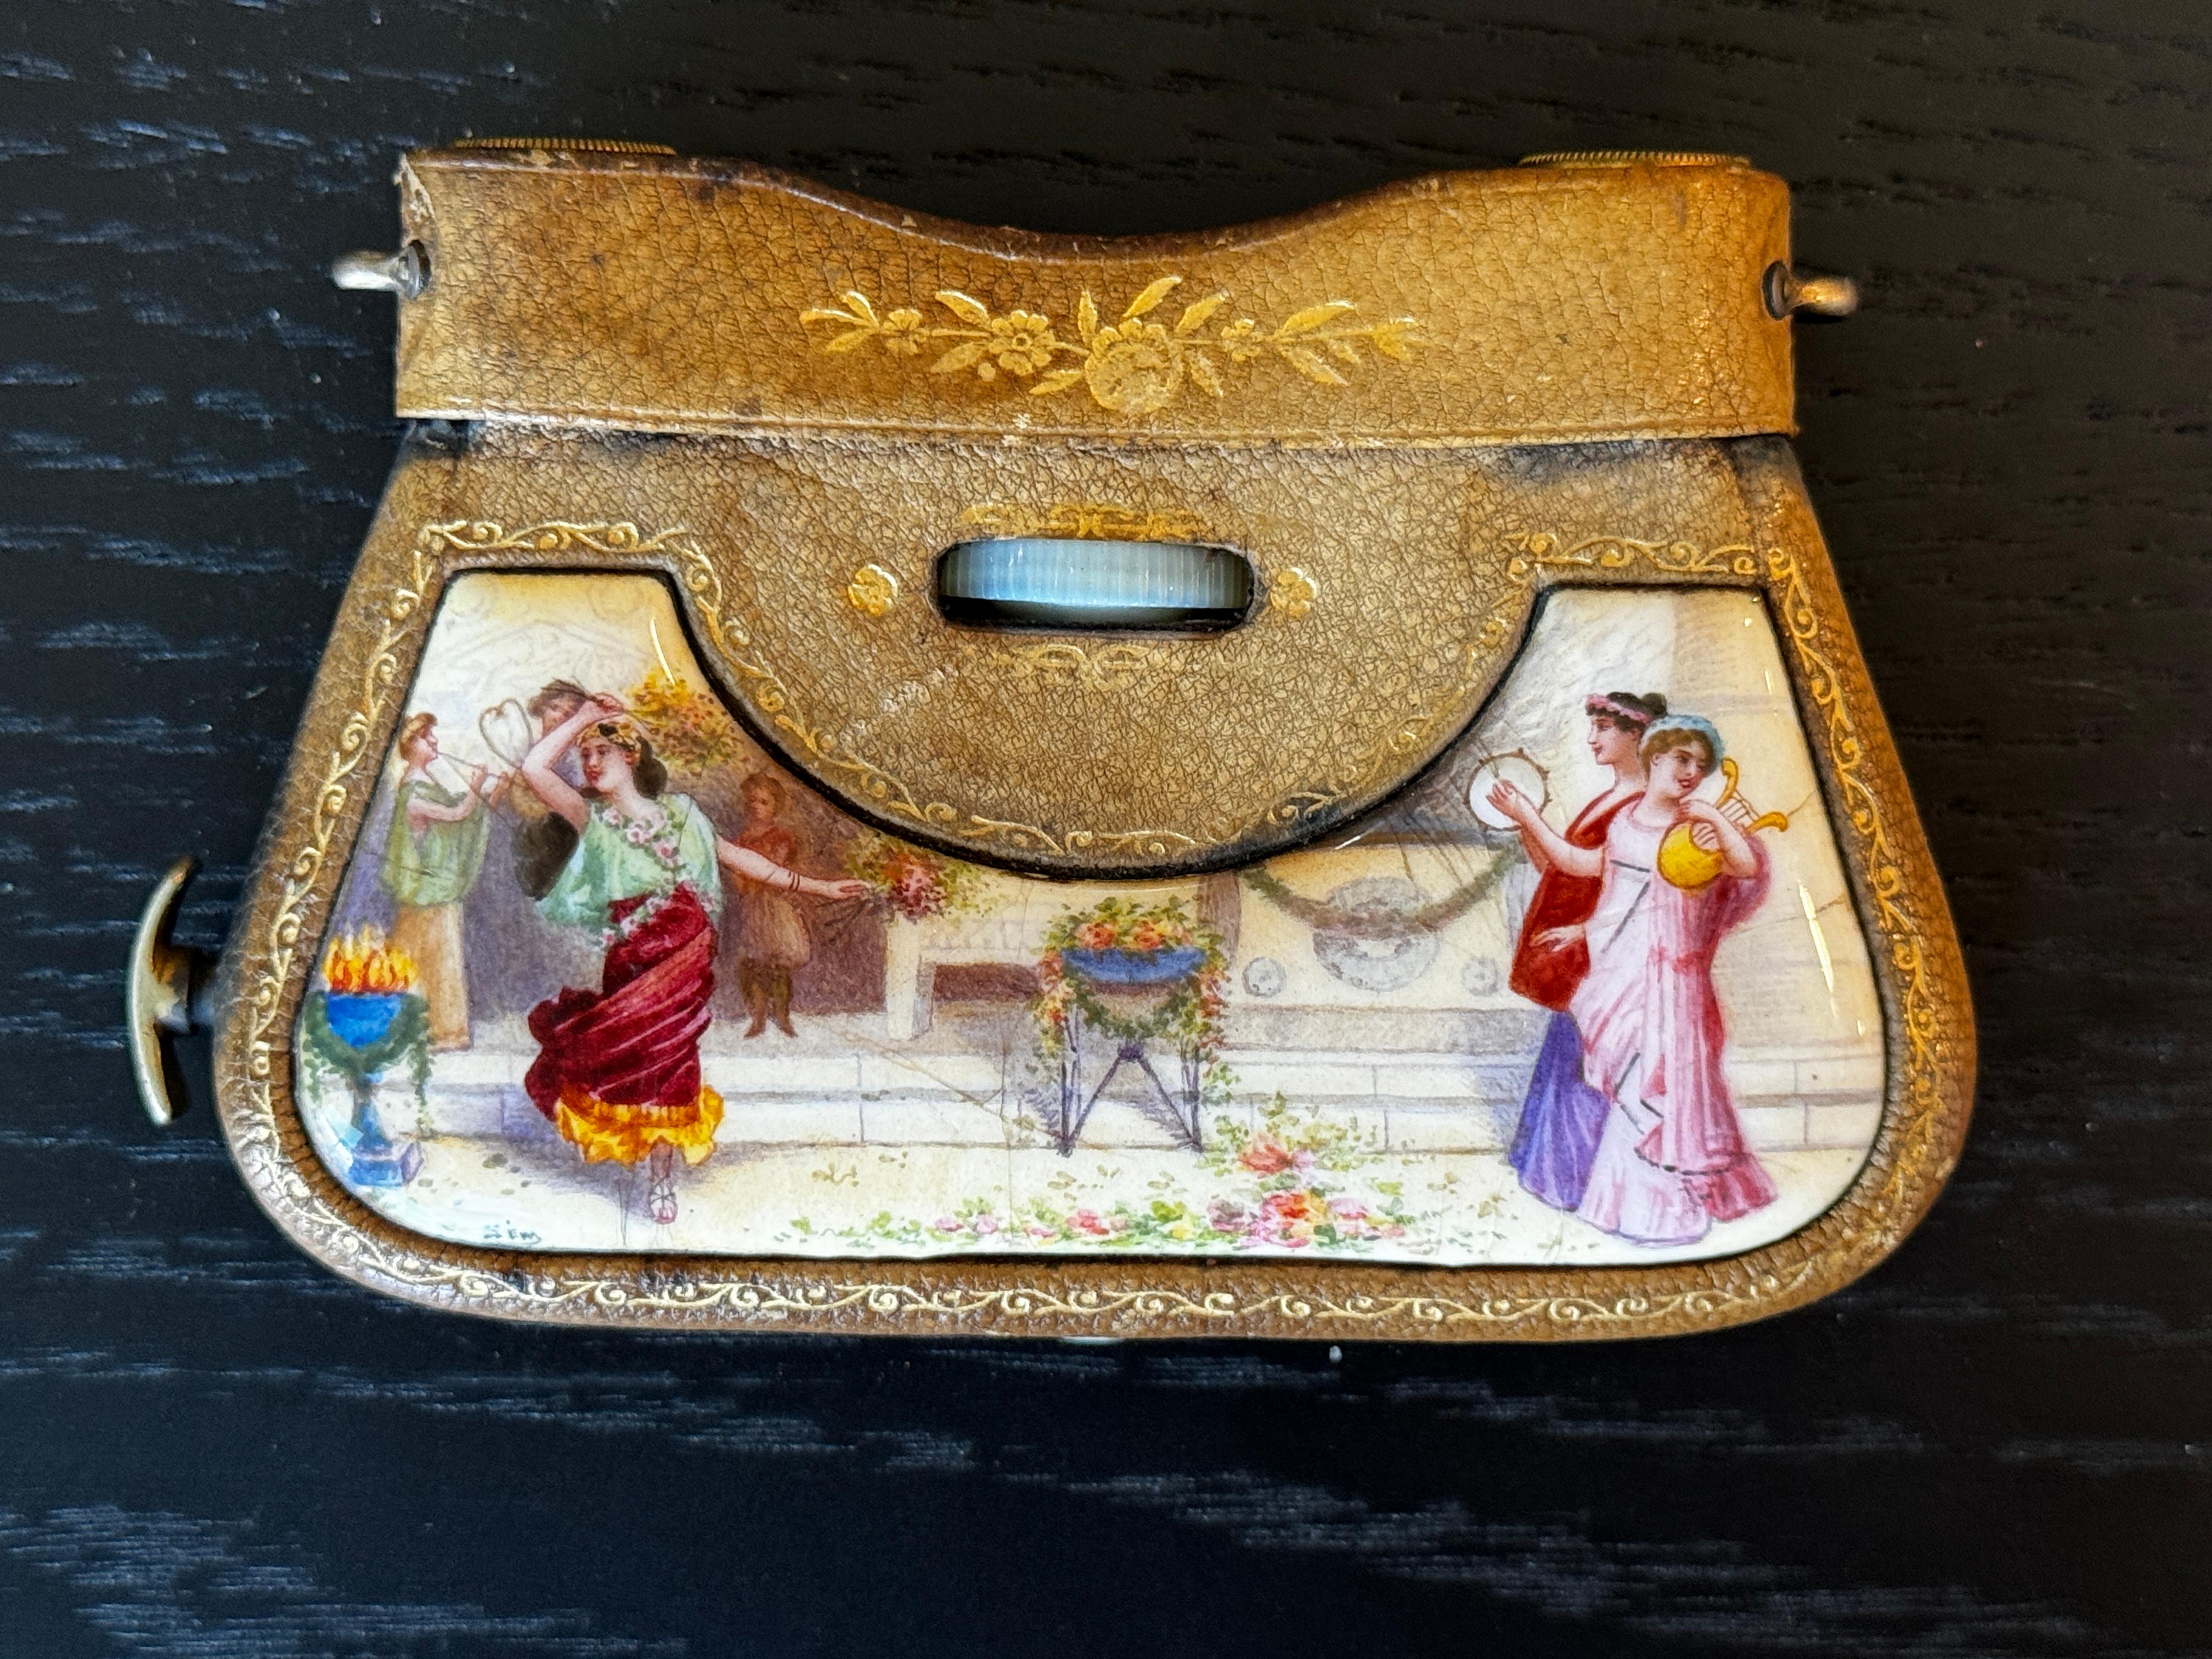 Pair of Folding Pera Glasses Tooled Leather in Purse Form

LA Migninne, Paris marked

4.25 x 5 x 2.75